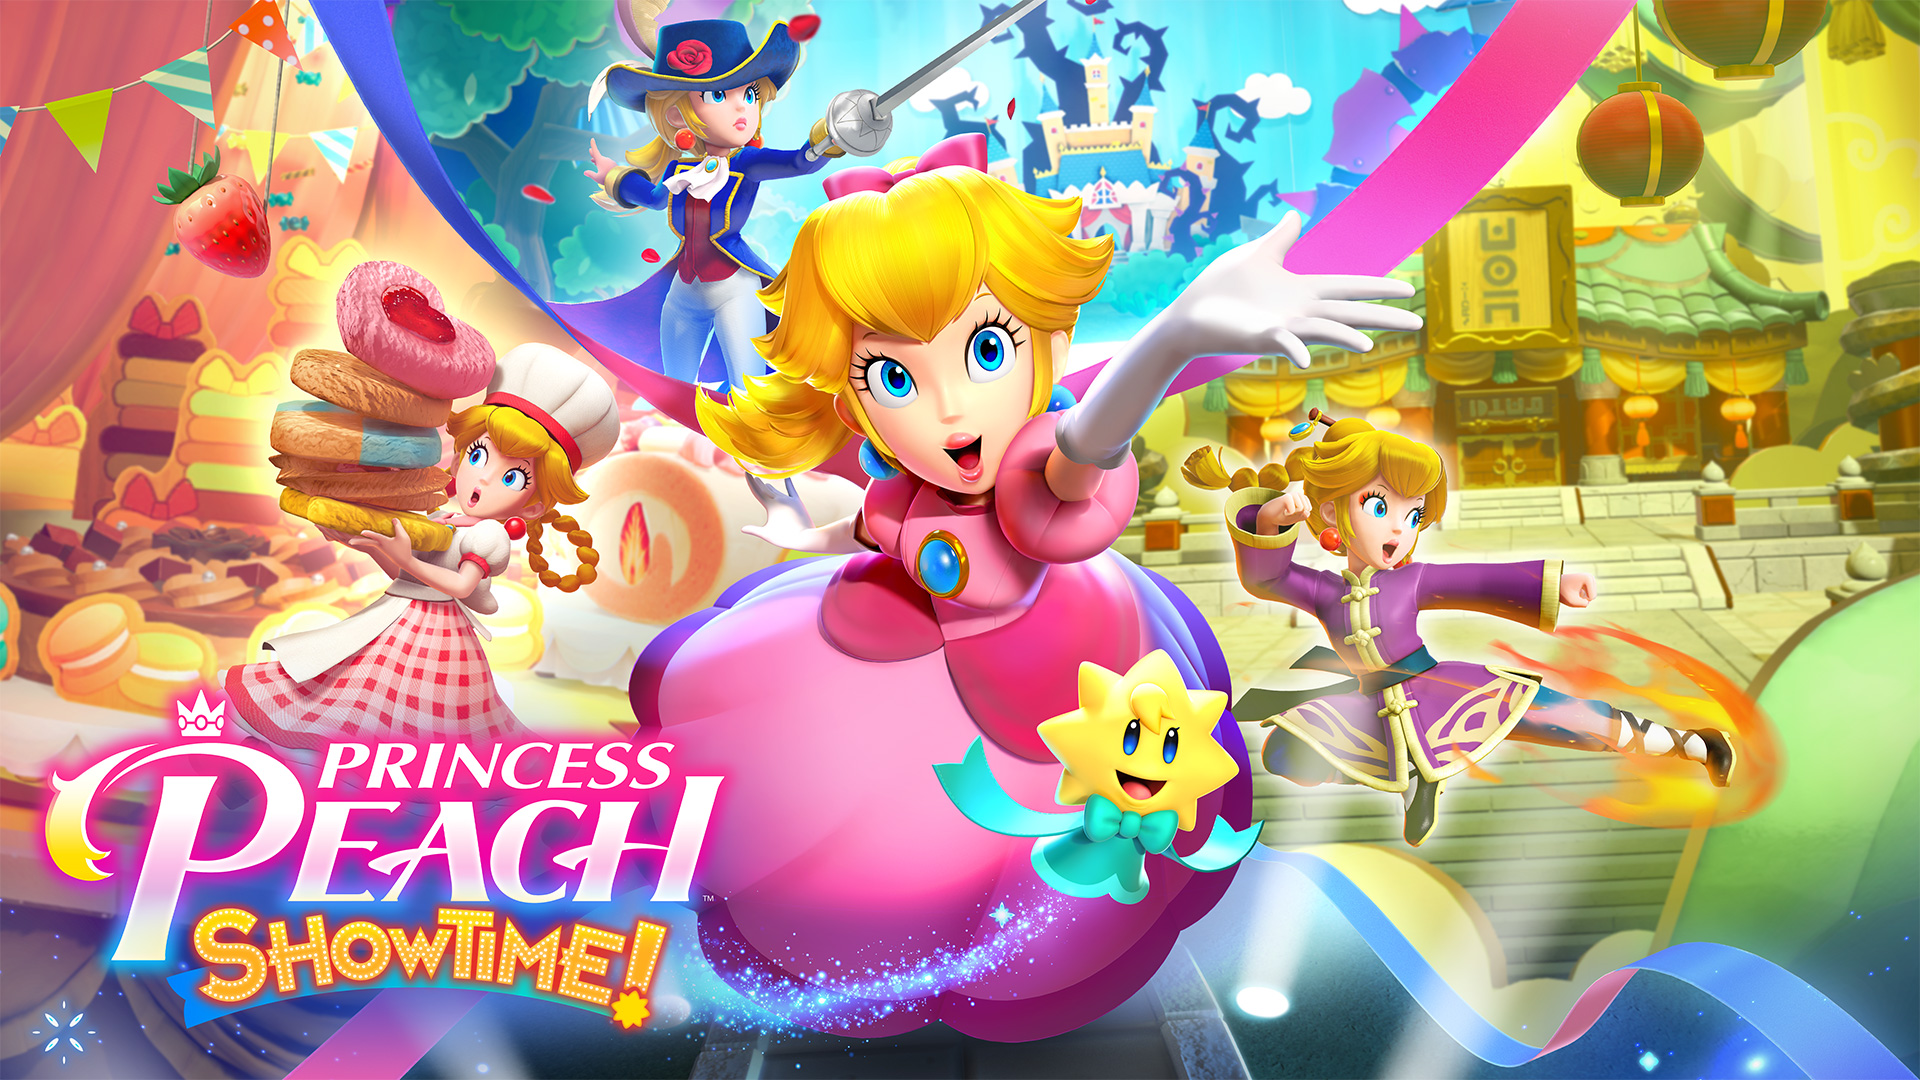 Nintendo Direct reveals Princess Peach: Showtime, and lots of remakes